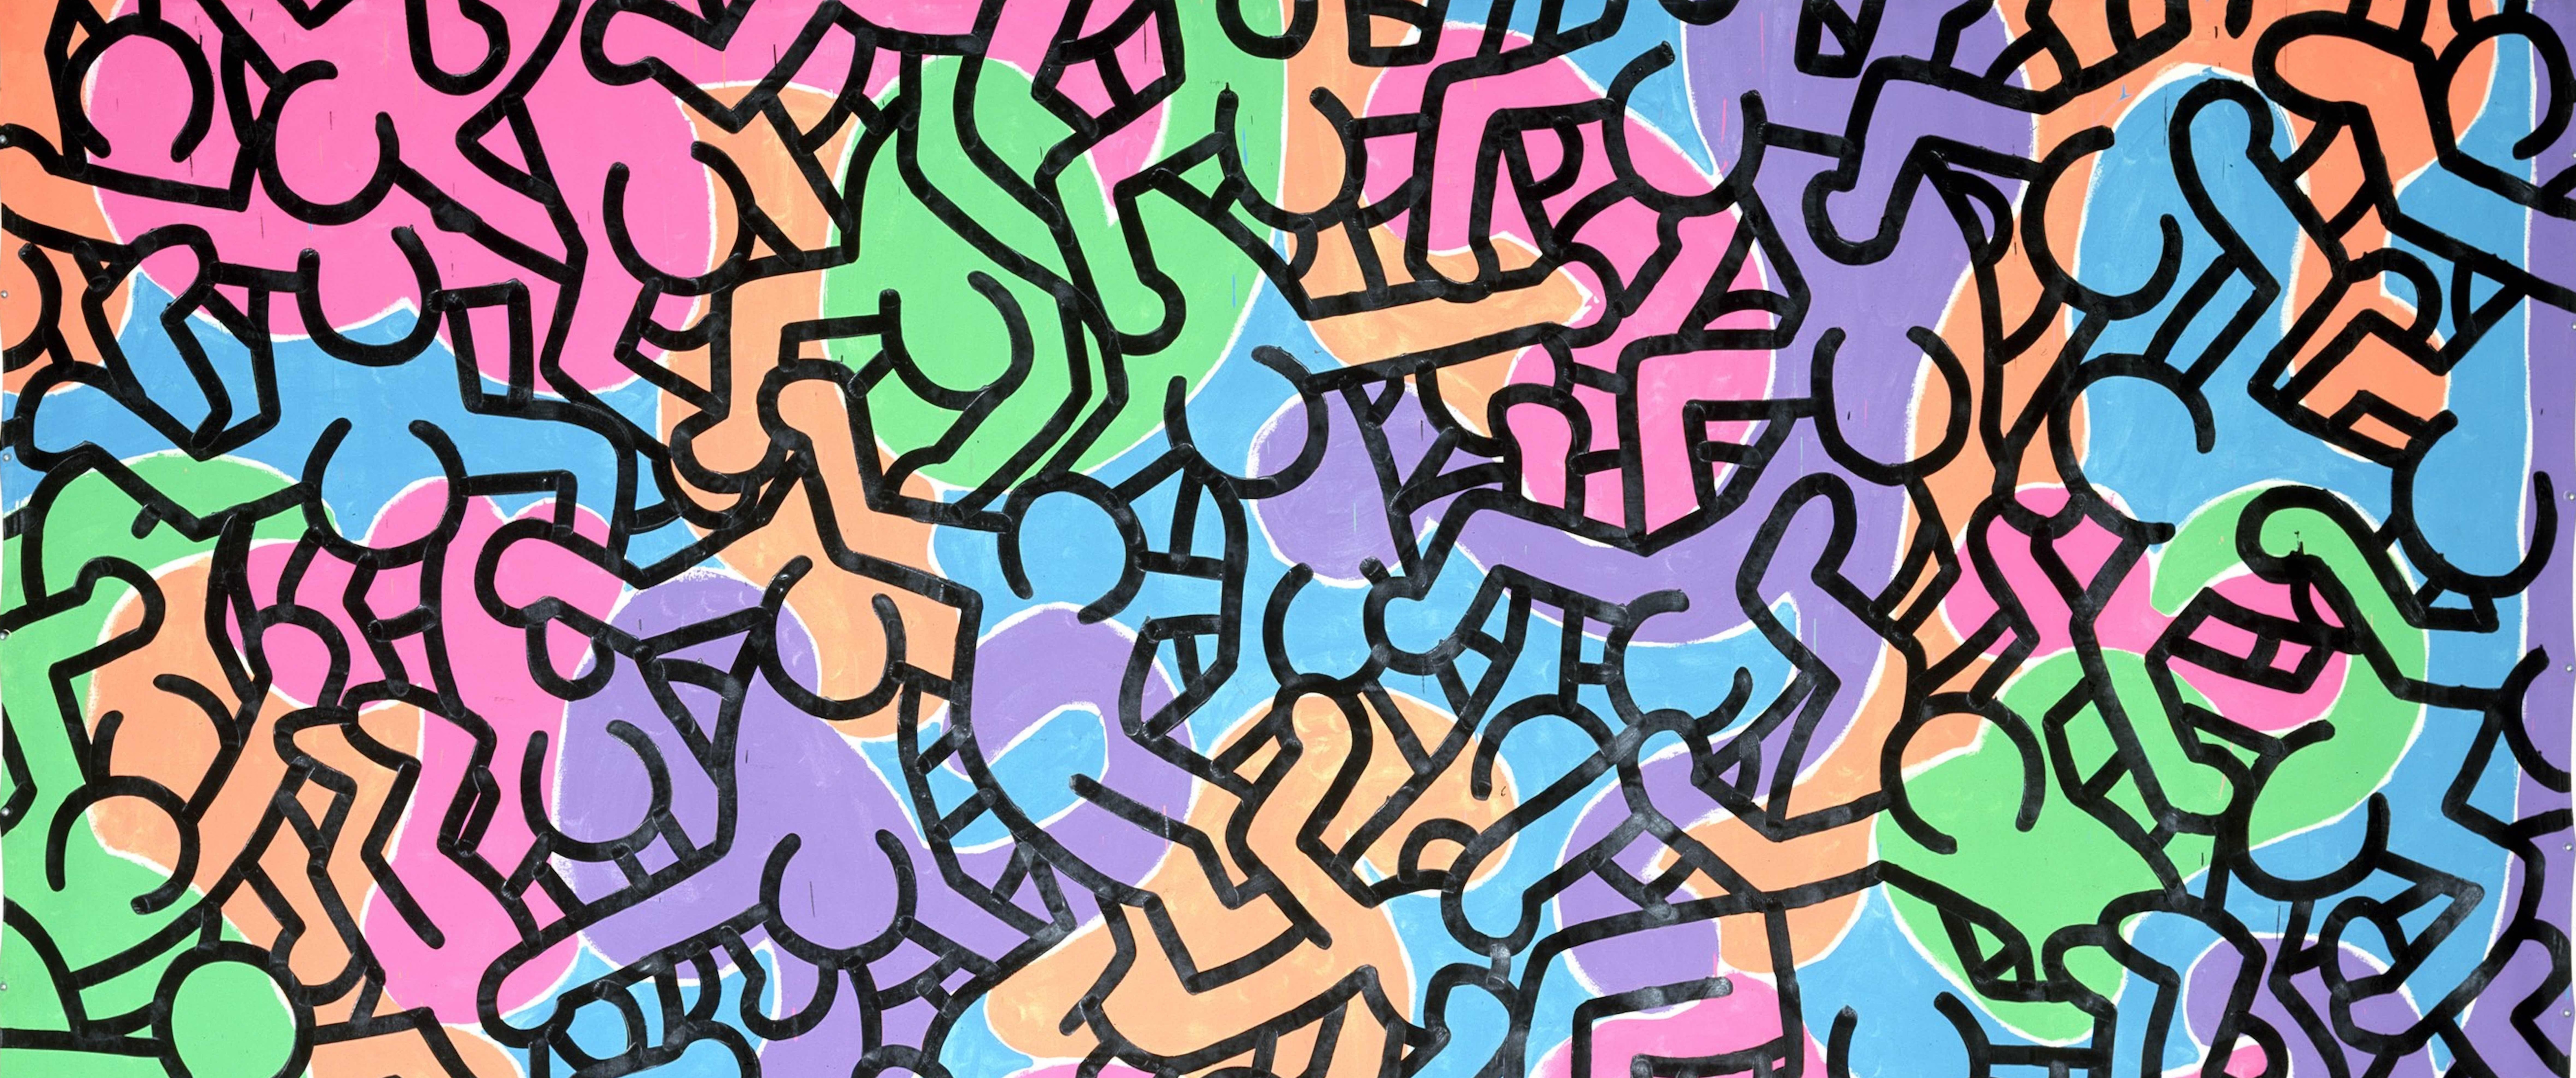 Keith Haring Acrylic Pop Art Fabric Oil Painting Drawing 6880x2880